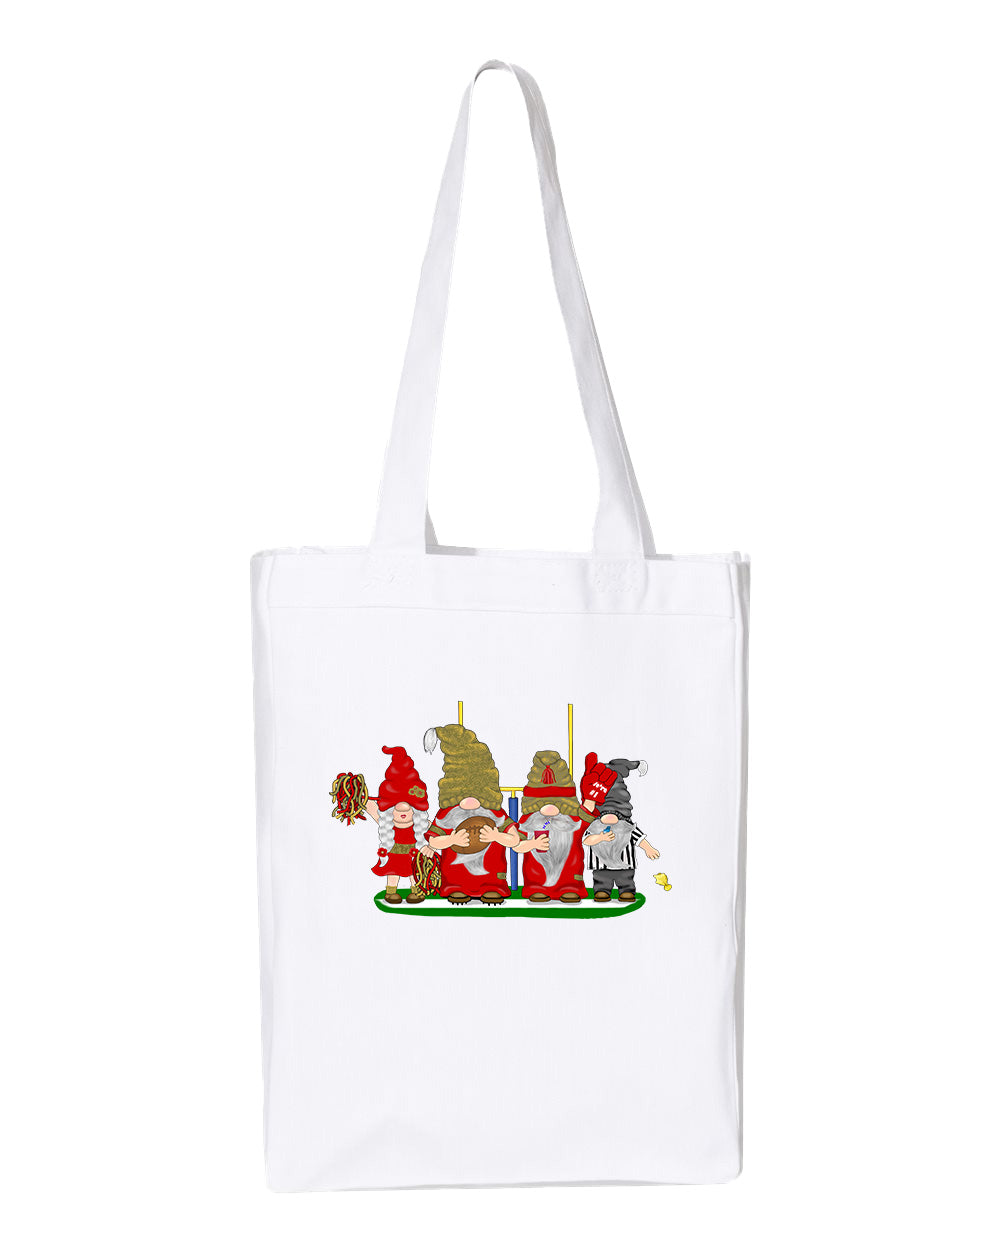 Red & Gold Football Gnomes  (similar to San Fransisco) on Gusset Tote